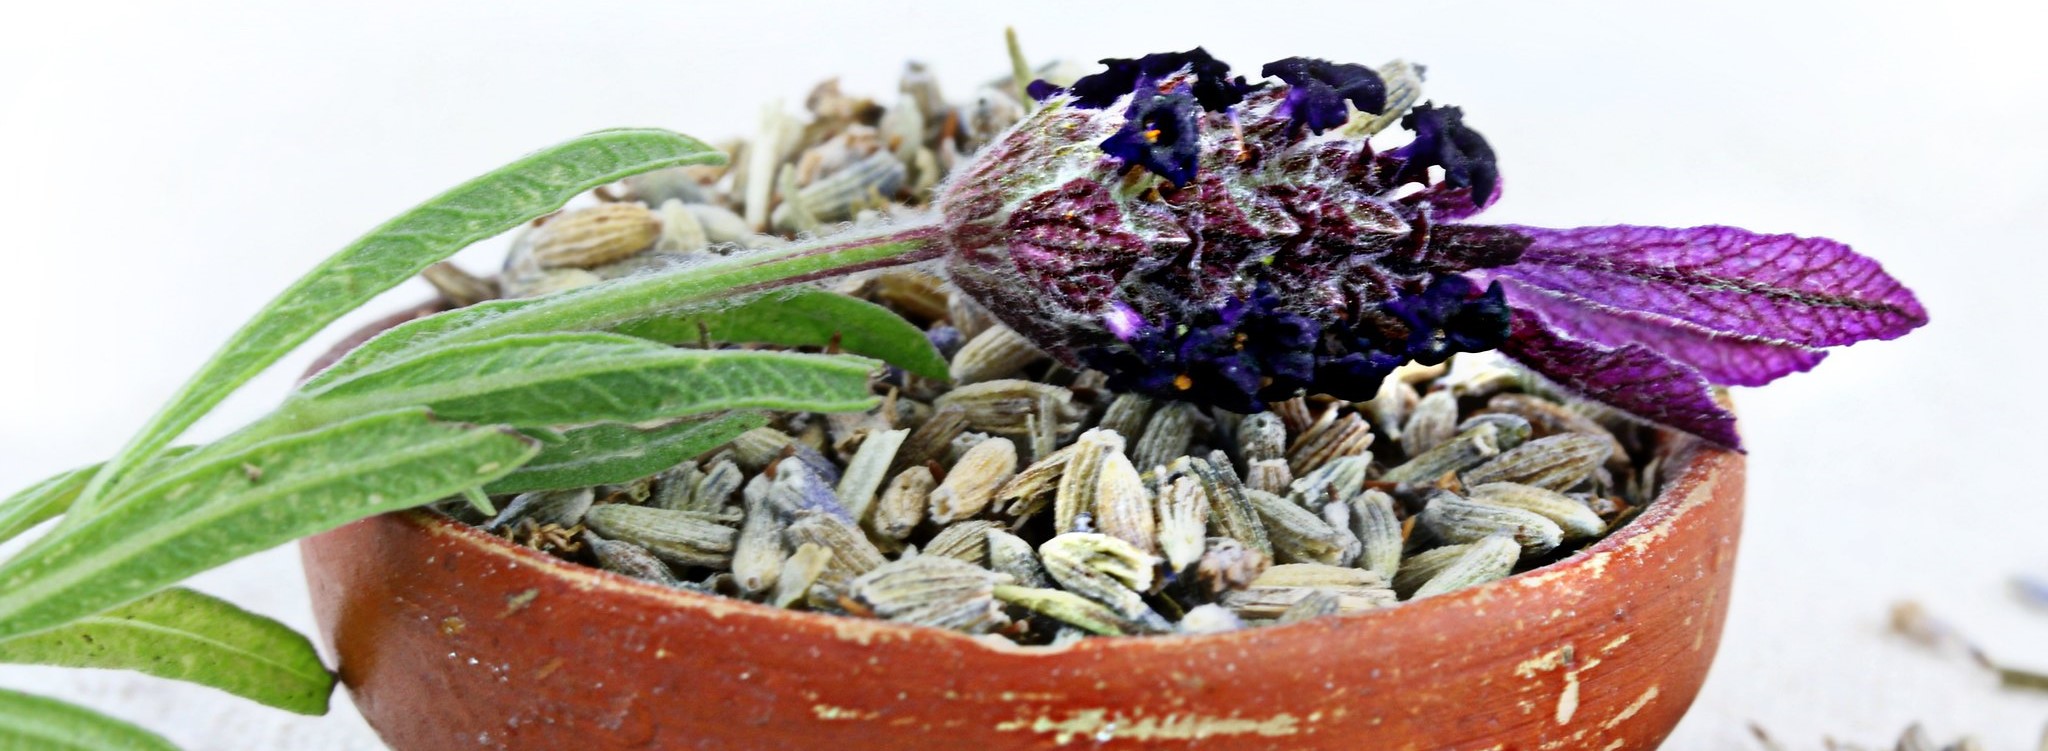 Lavender in a pot – what should you know about it?